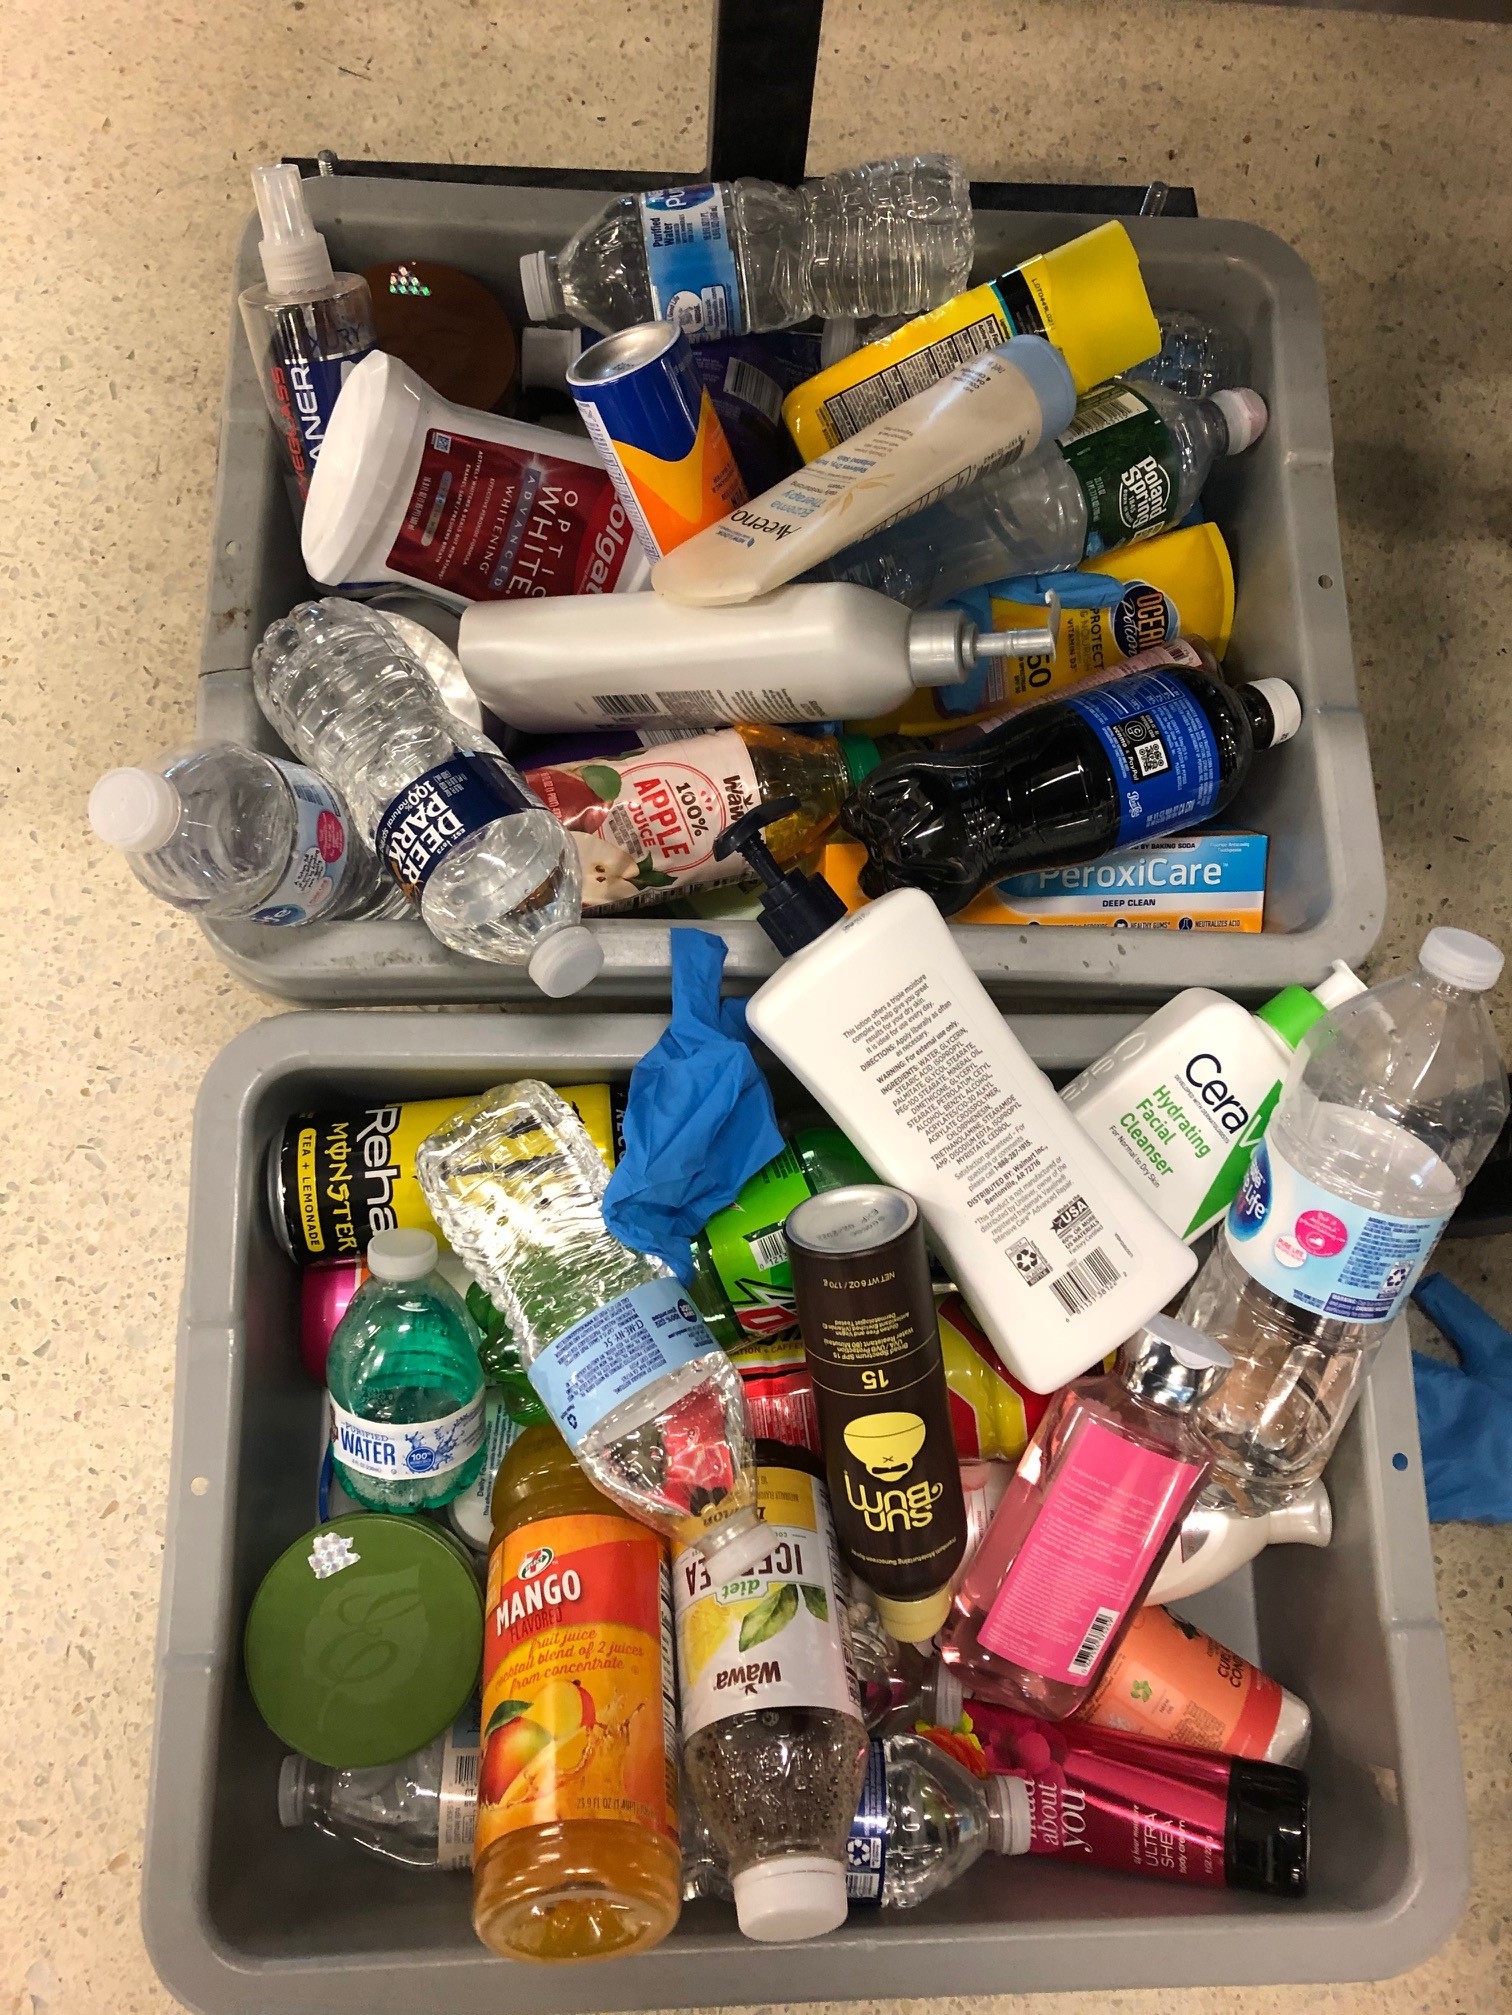 An abundance of prohibited items is slowing down BWI Airport's TSA  checkpoints